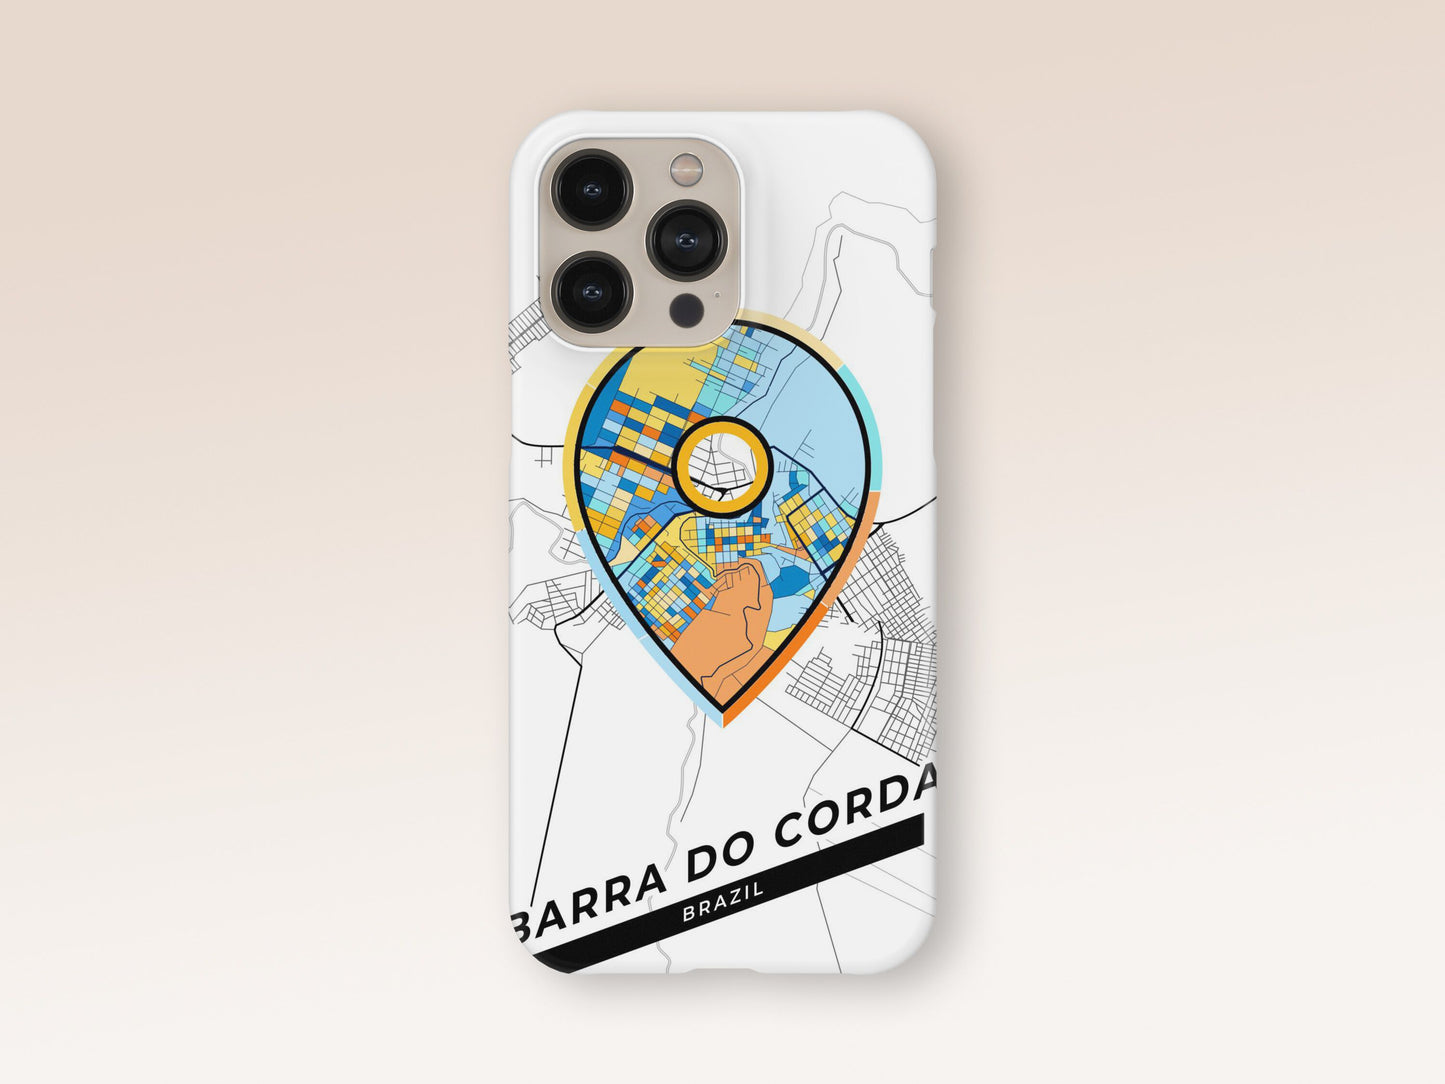 Barra Do Corda Brazil slim phone case with colorful icon. Birthday, wedding or housewarming gift. Couple match cases. 1